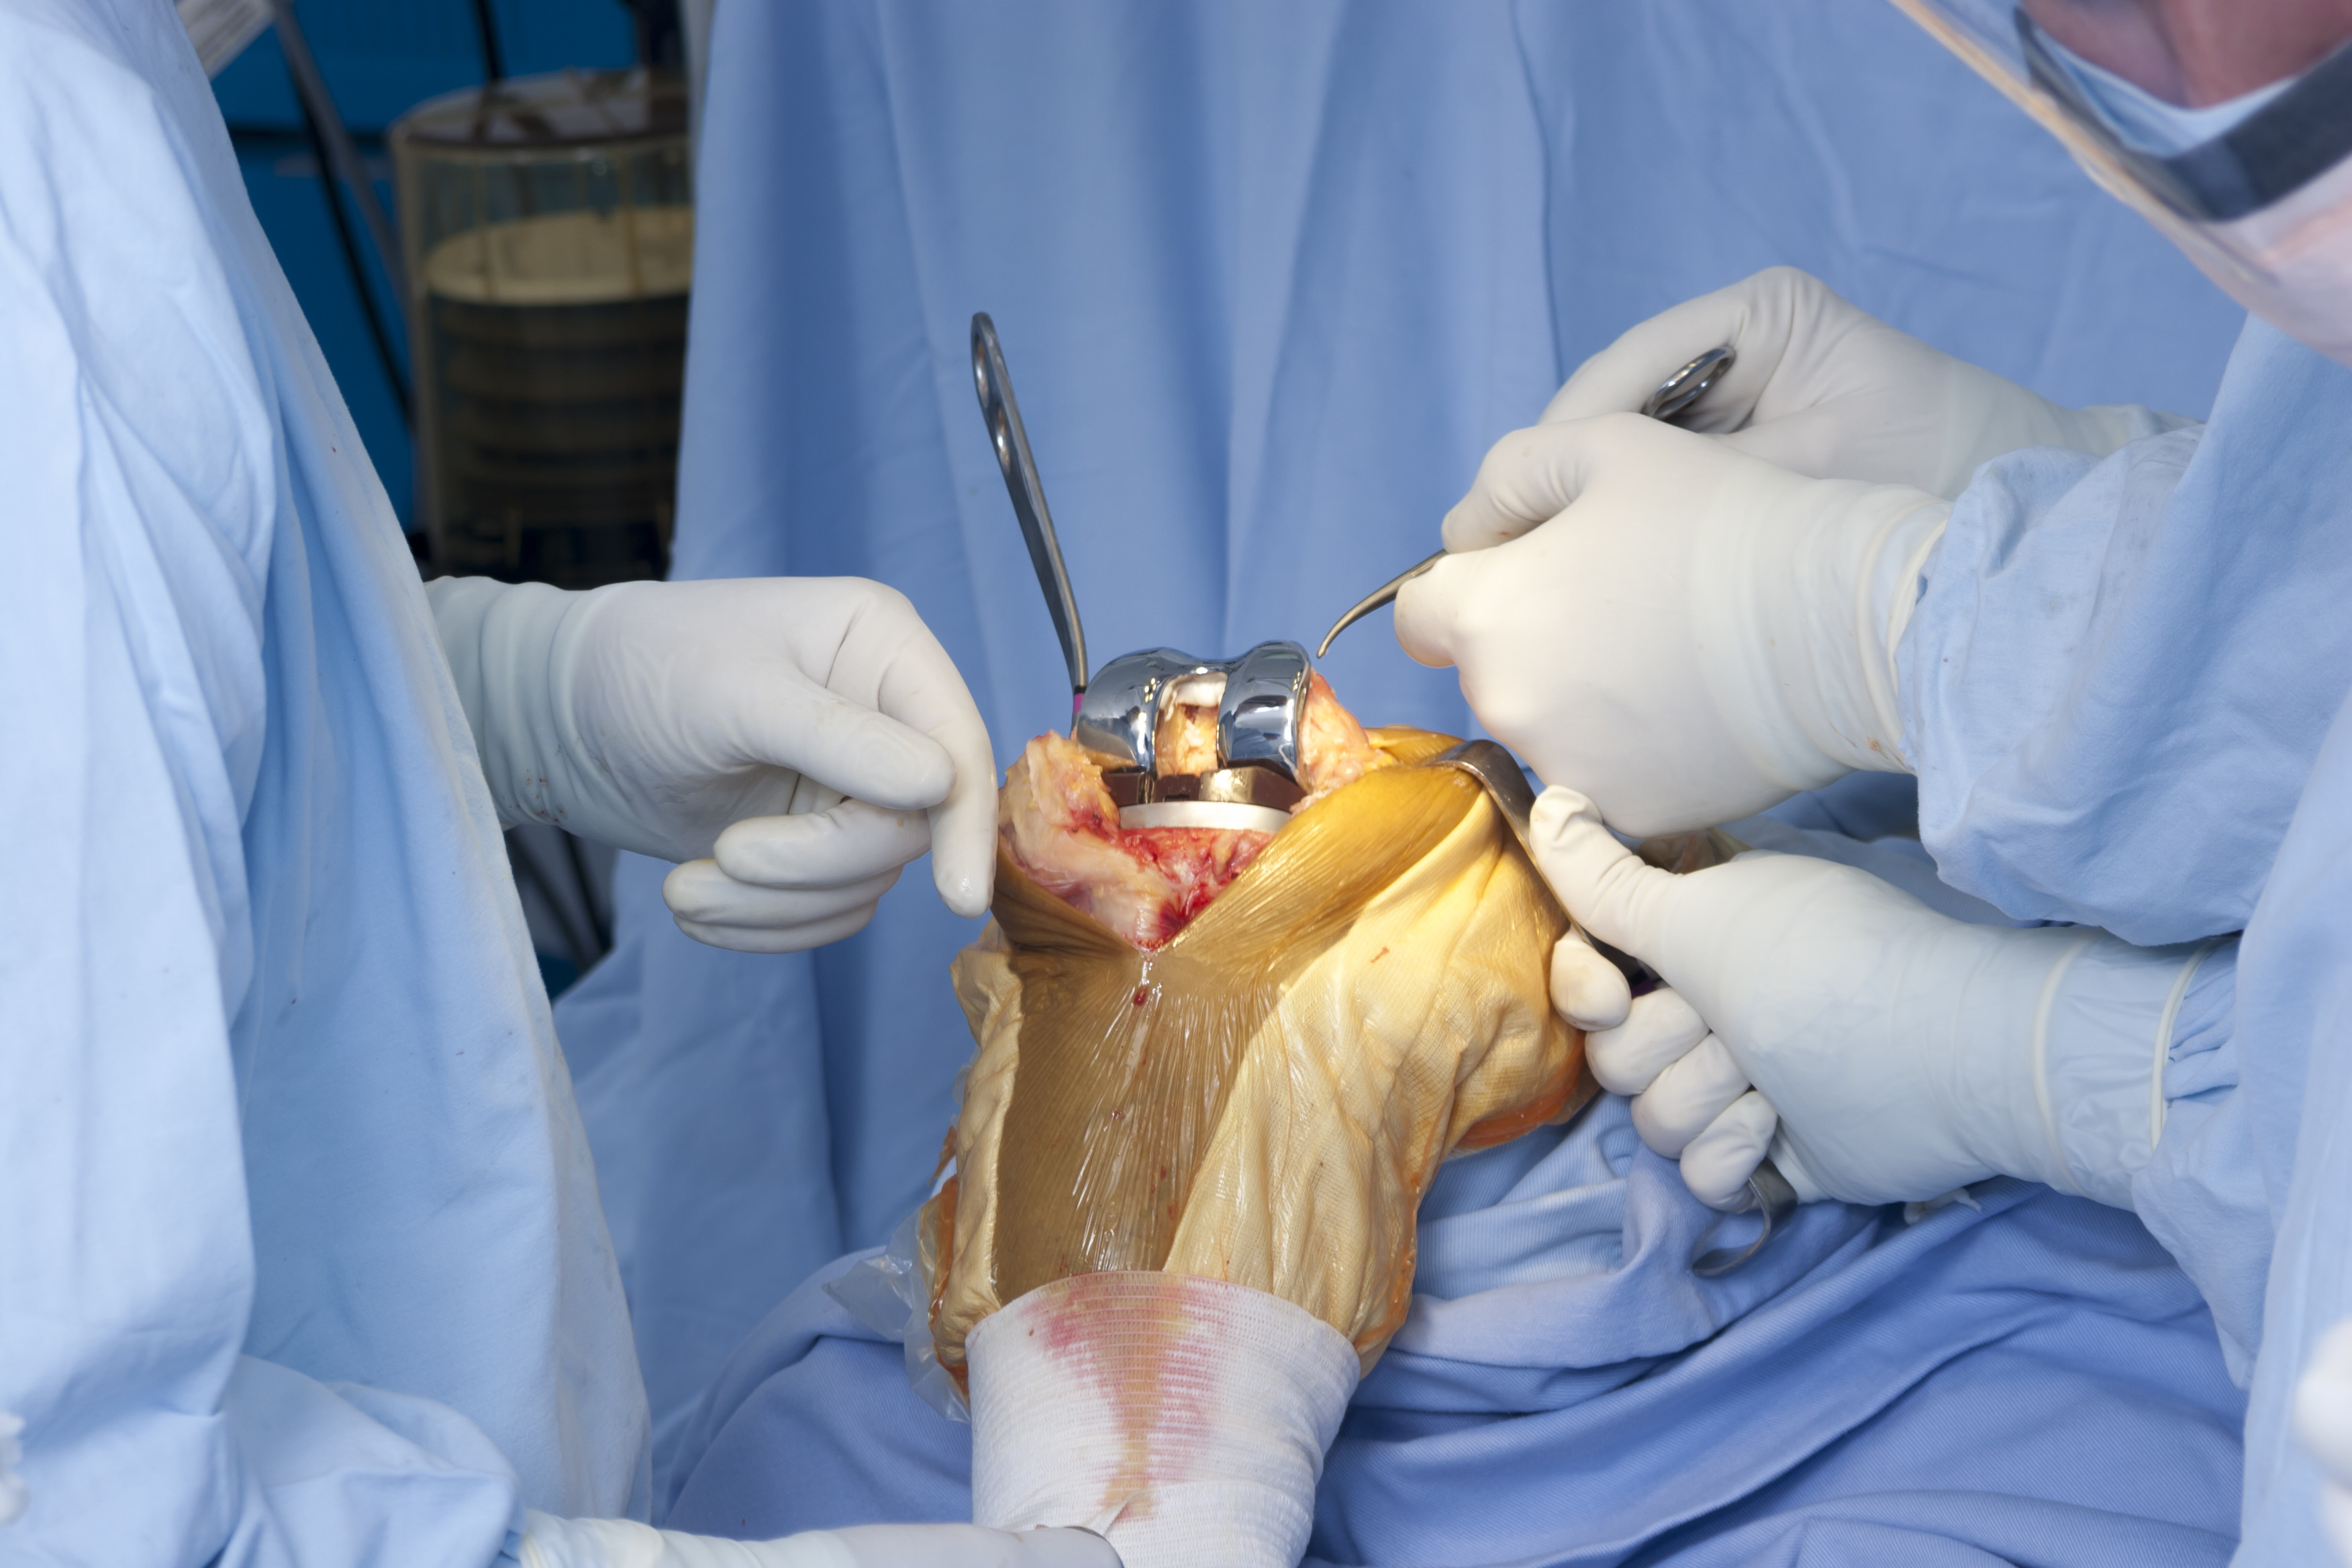 Knee Replacement Surgery in Iran